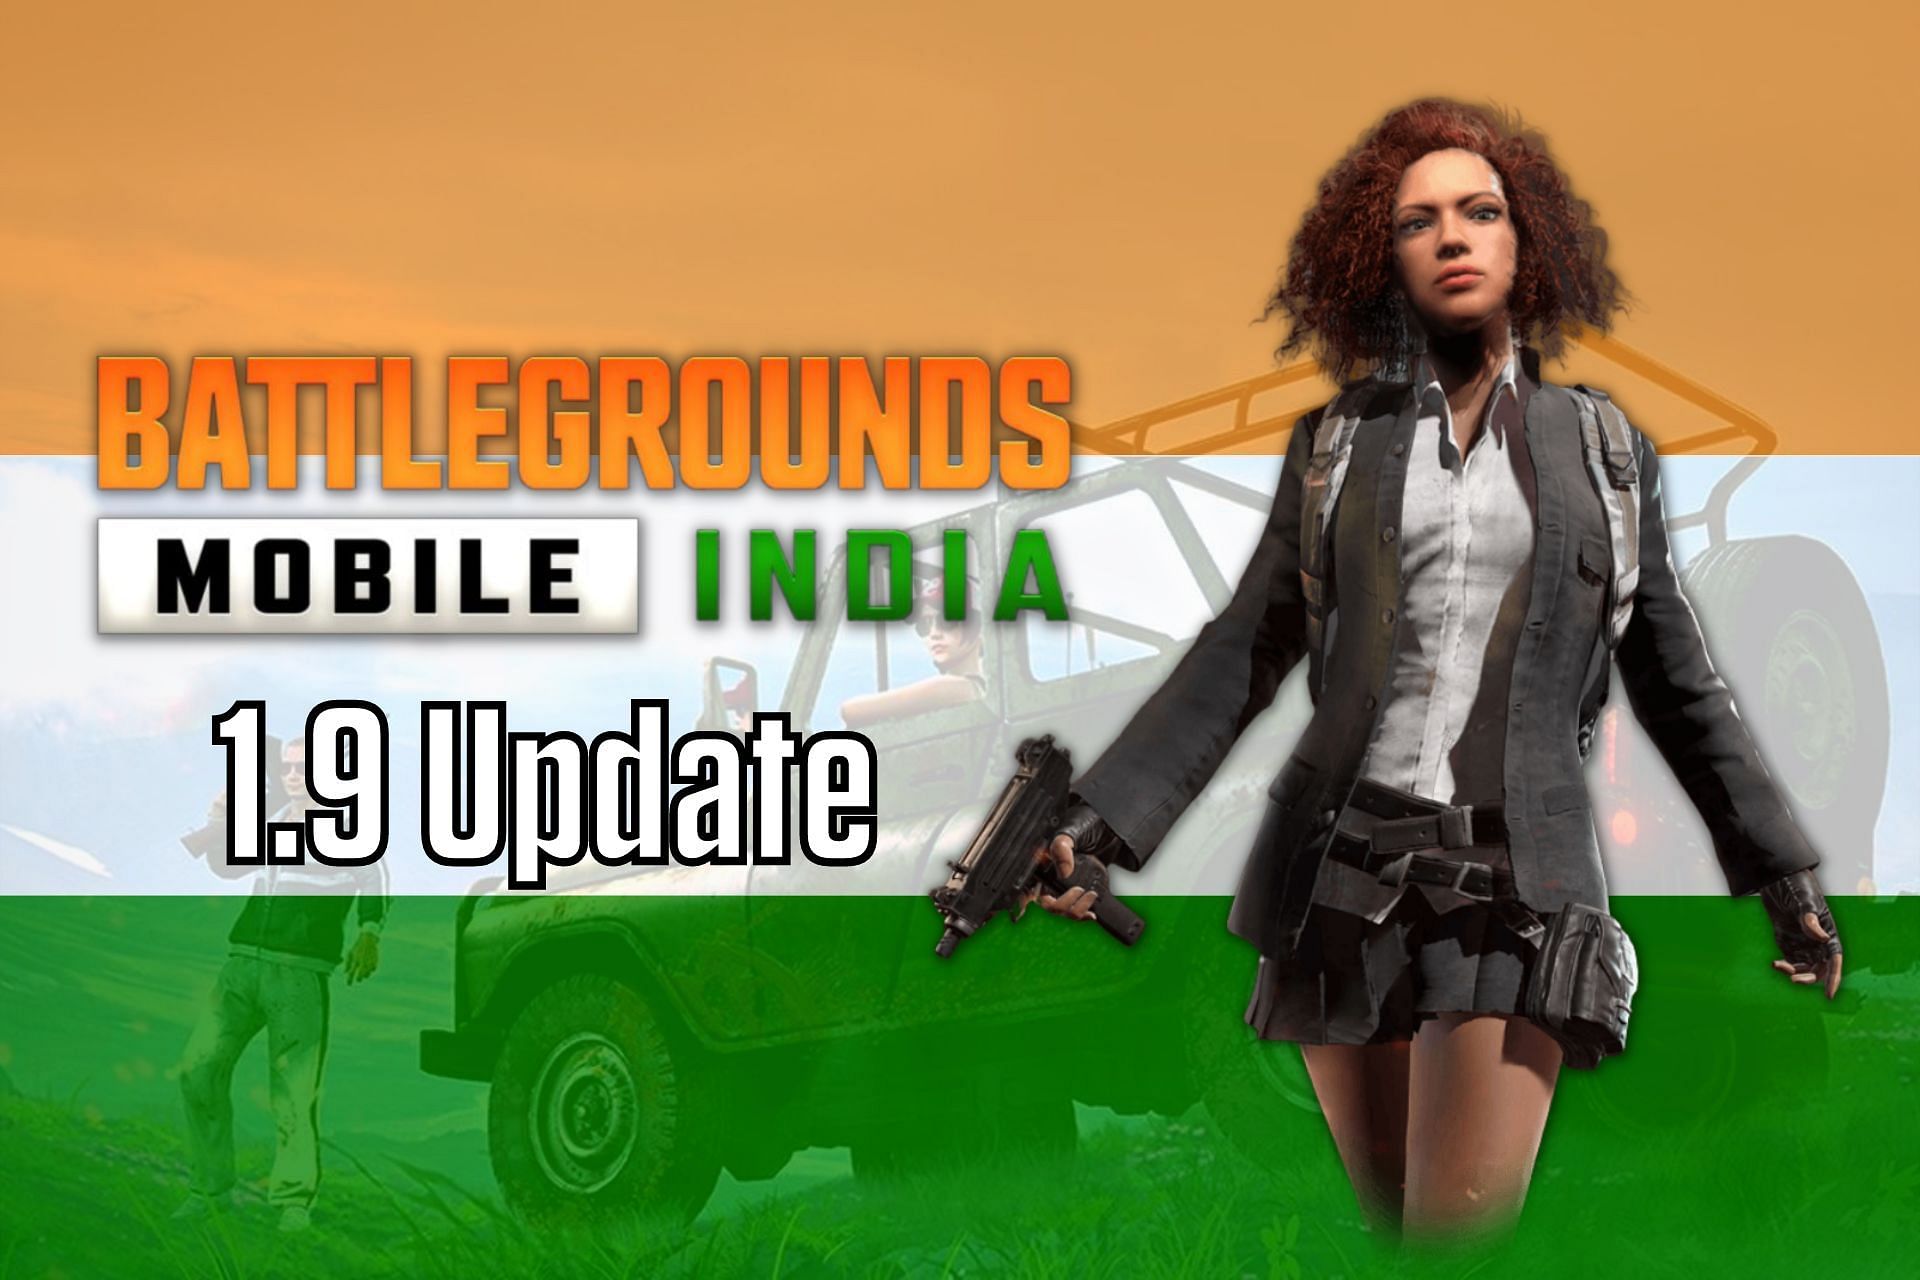 Playing the new 1.9 update in BGMI to learn about the new features and changes (Image via Sportskeeda)